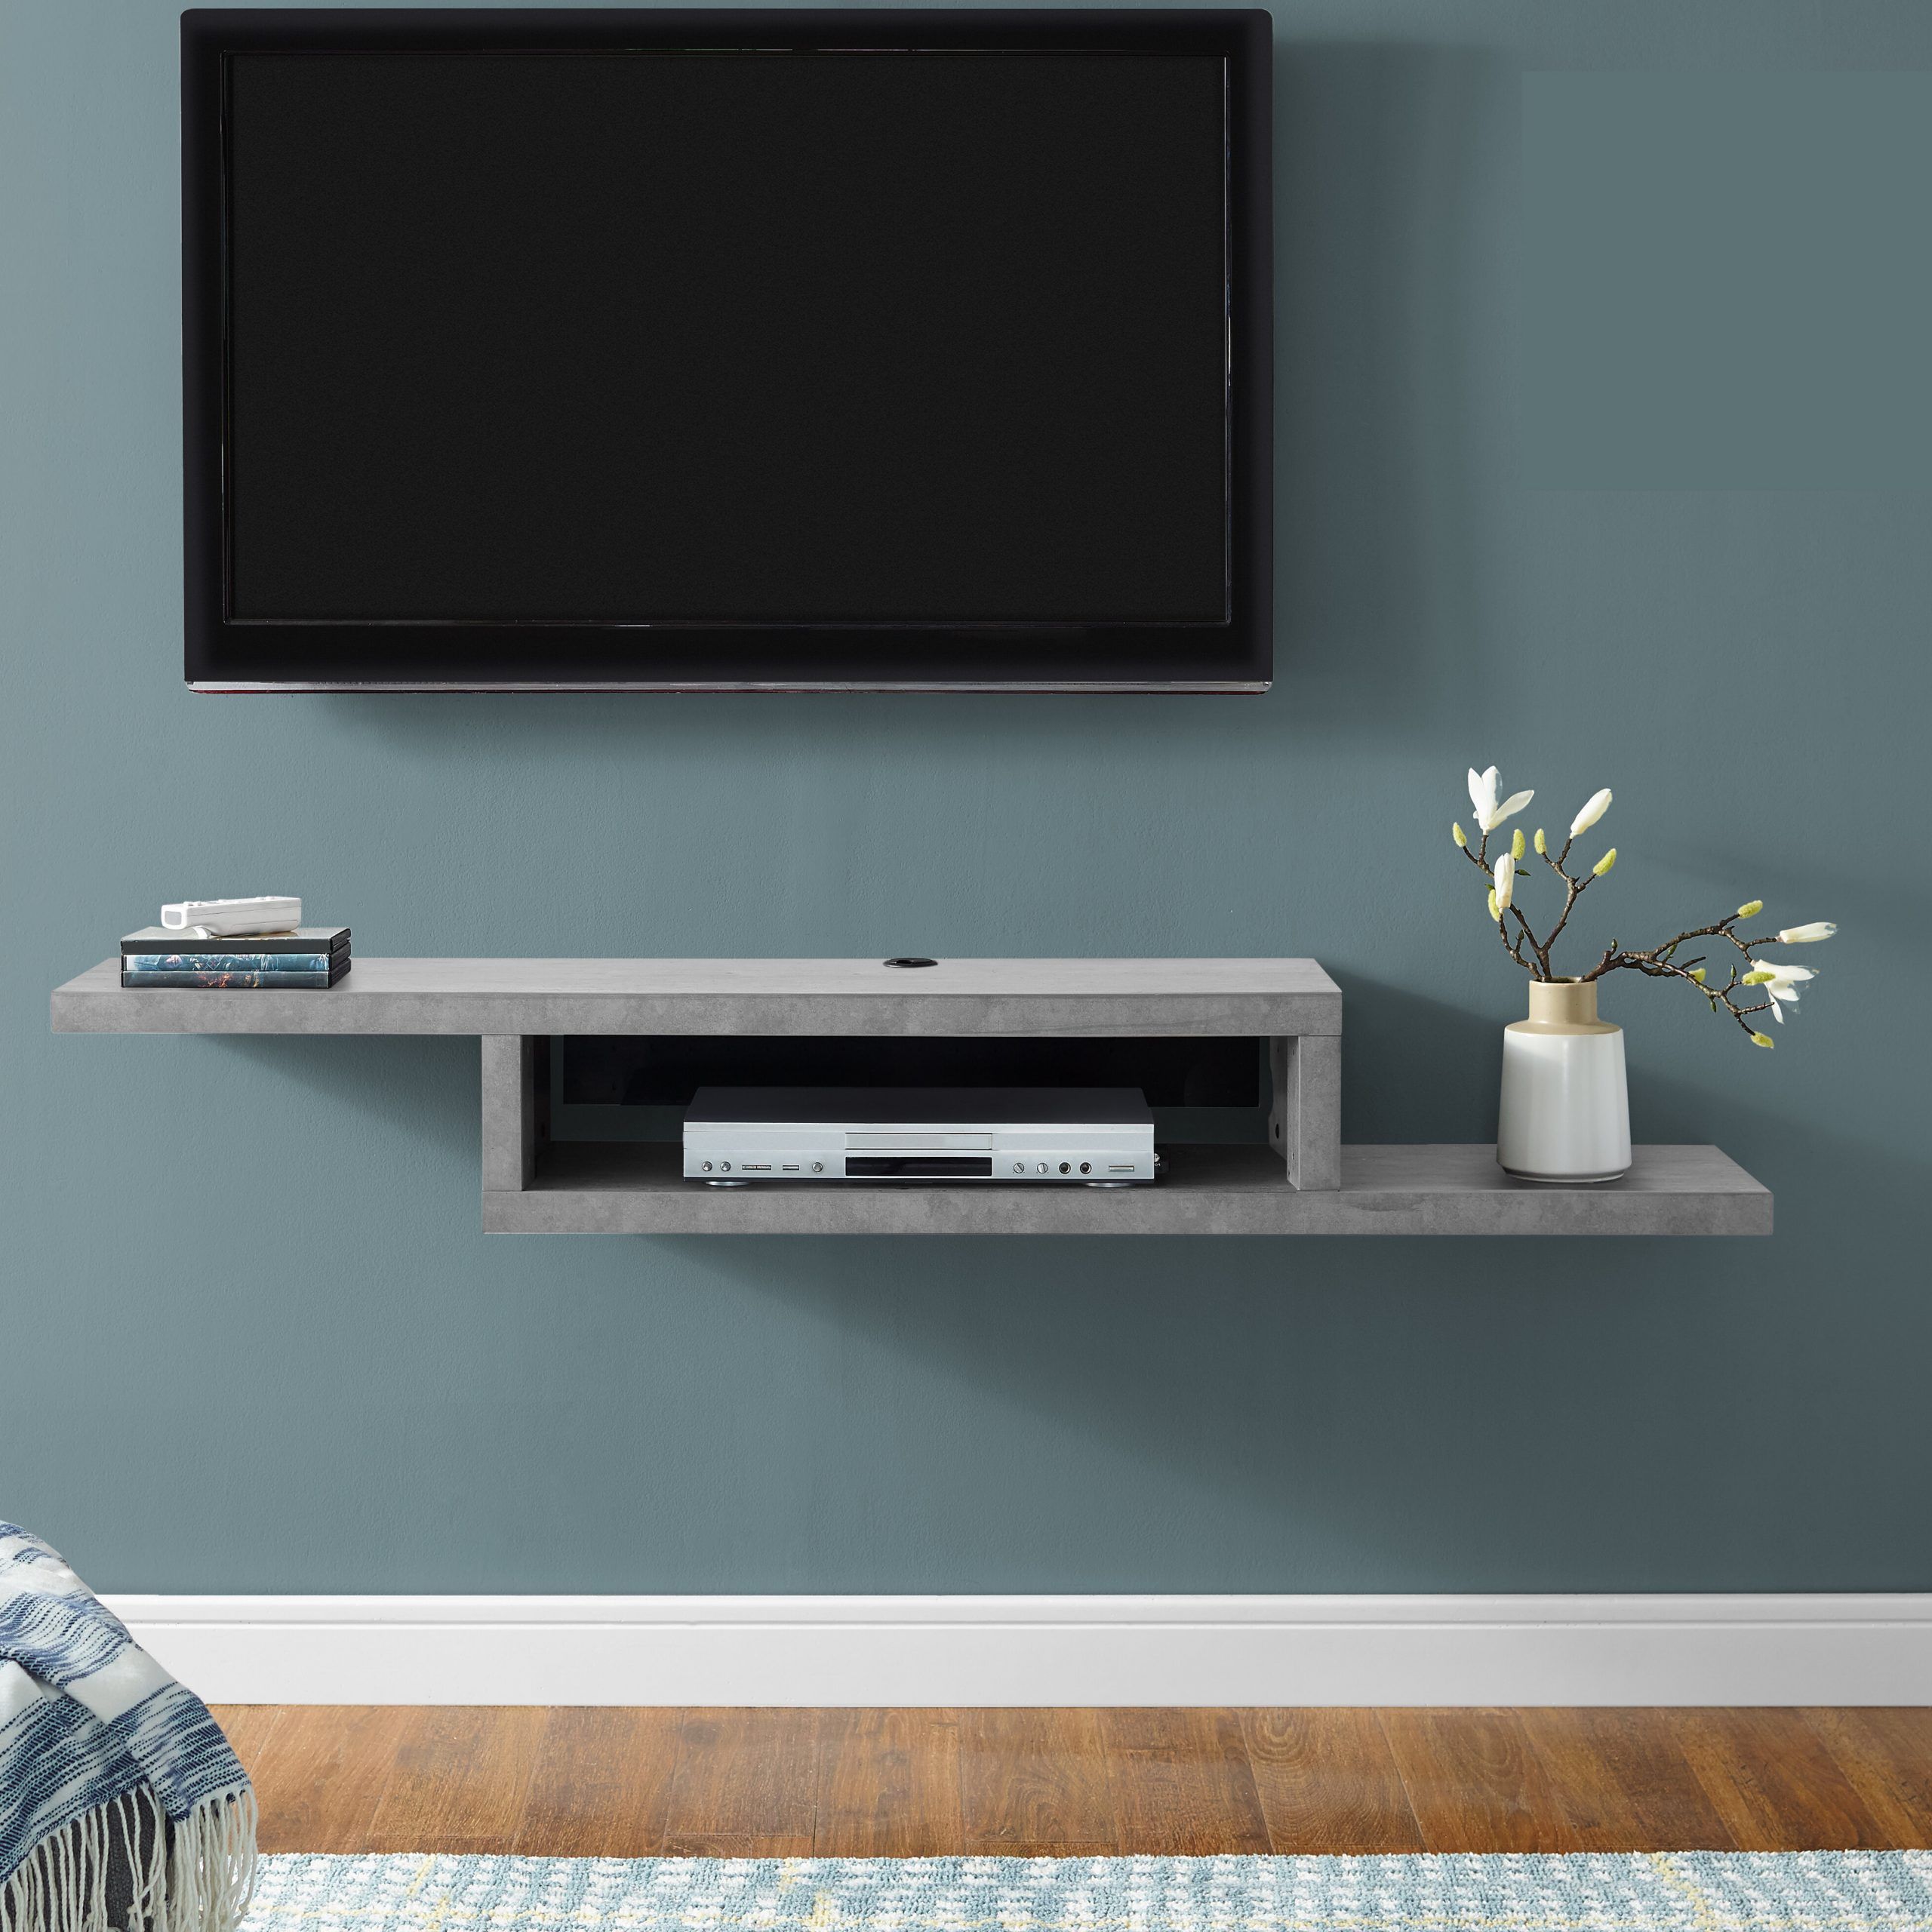 Wayfair Within Tv Stands With Shelf (View 4 of 10)